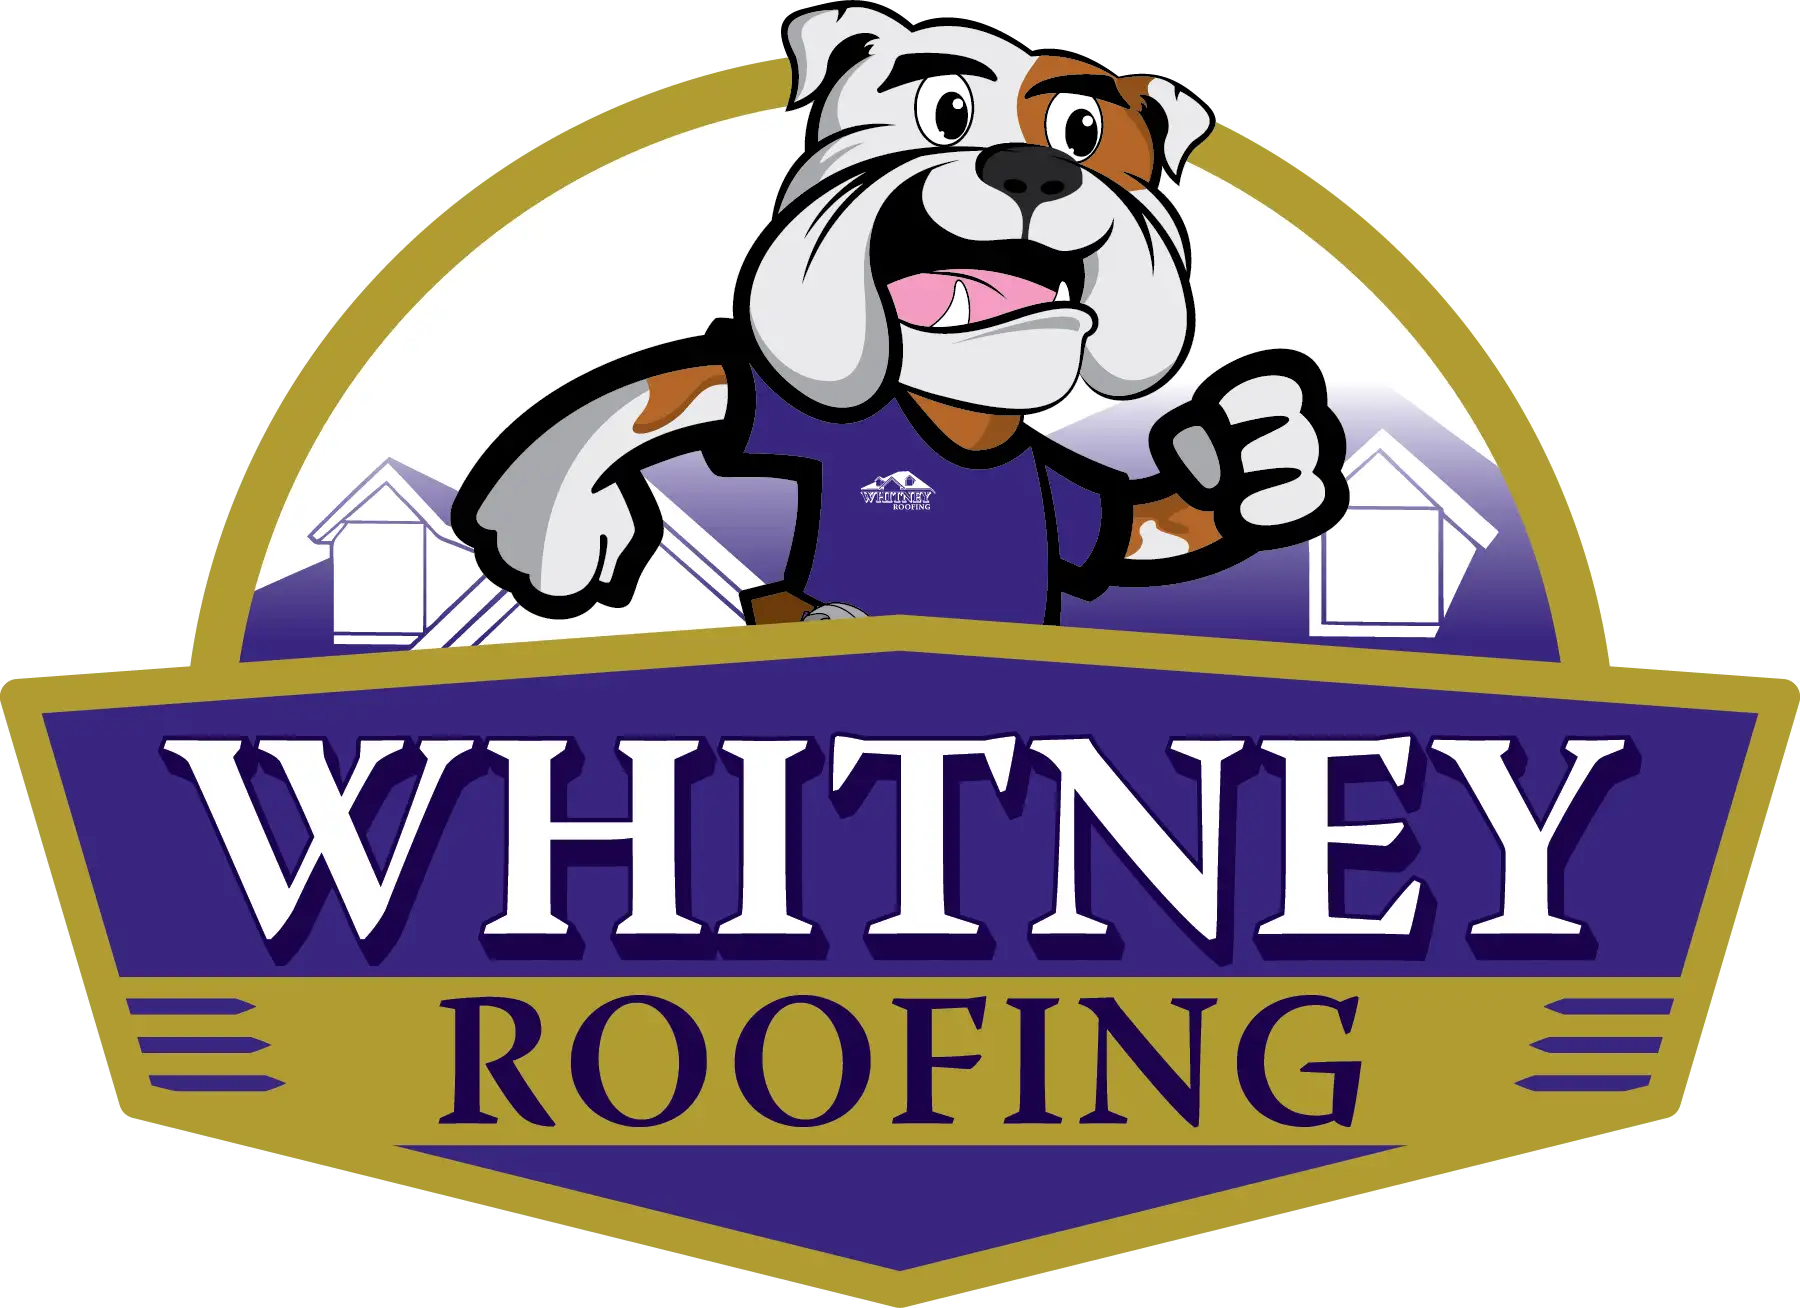 Whitney Roofing Central Illinois Trusted Local Roofers